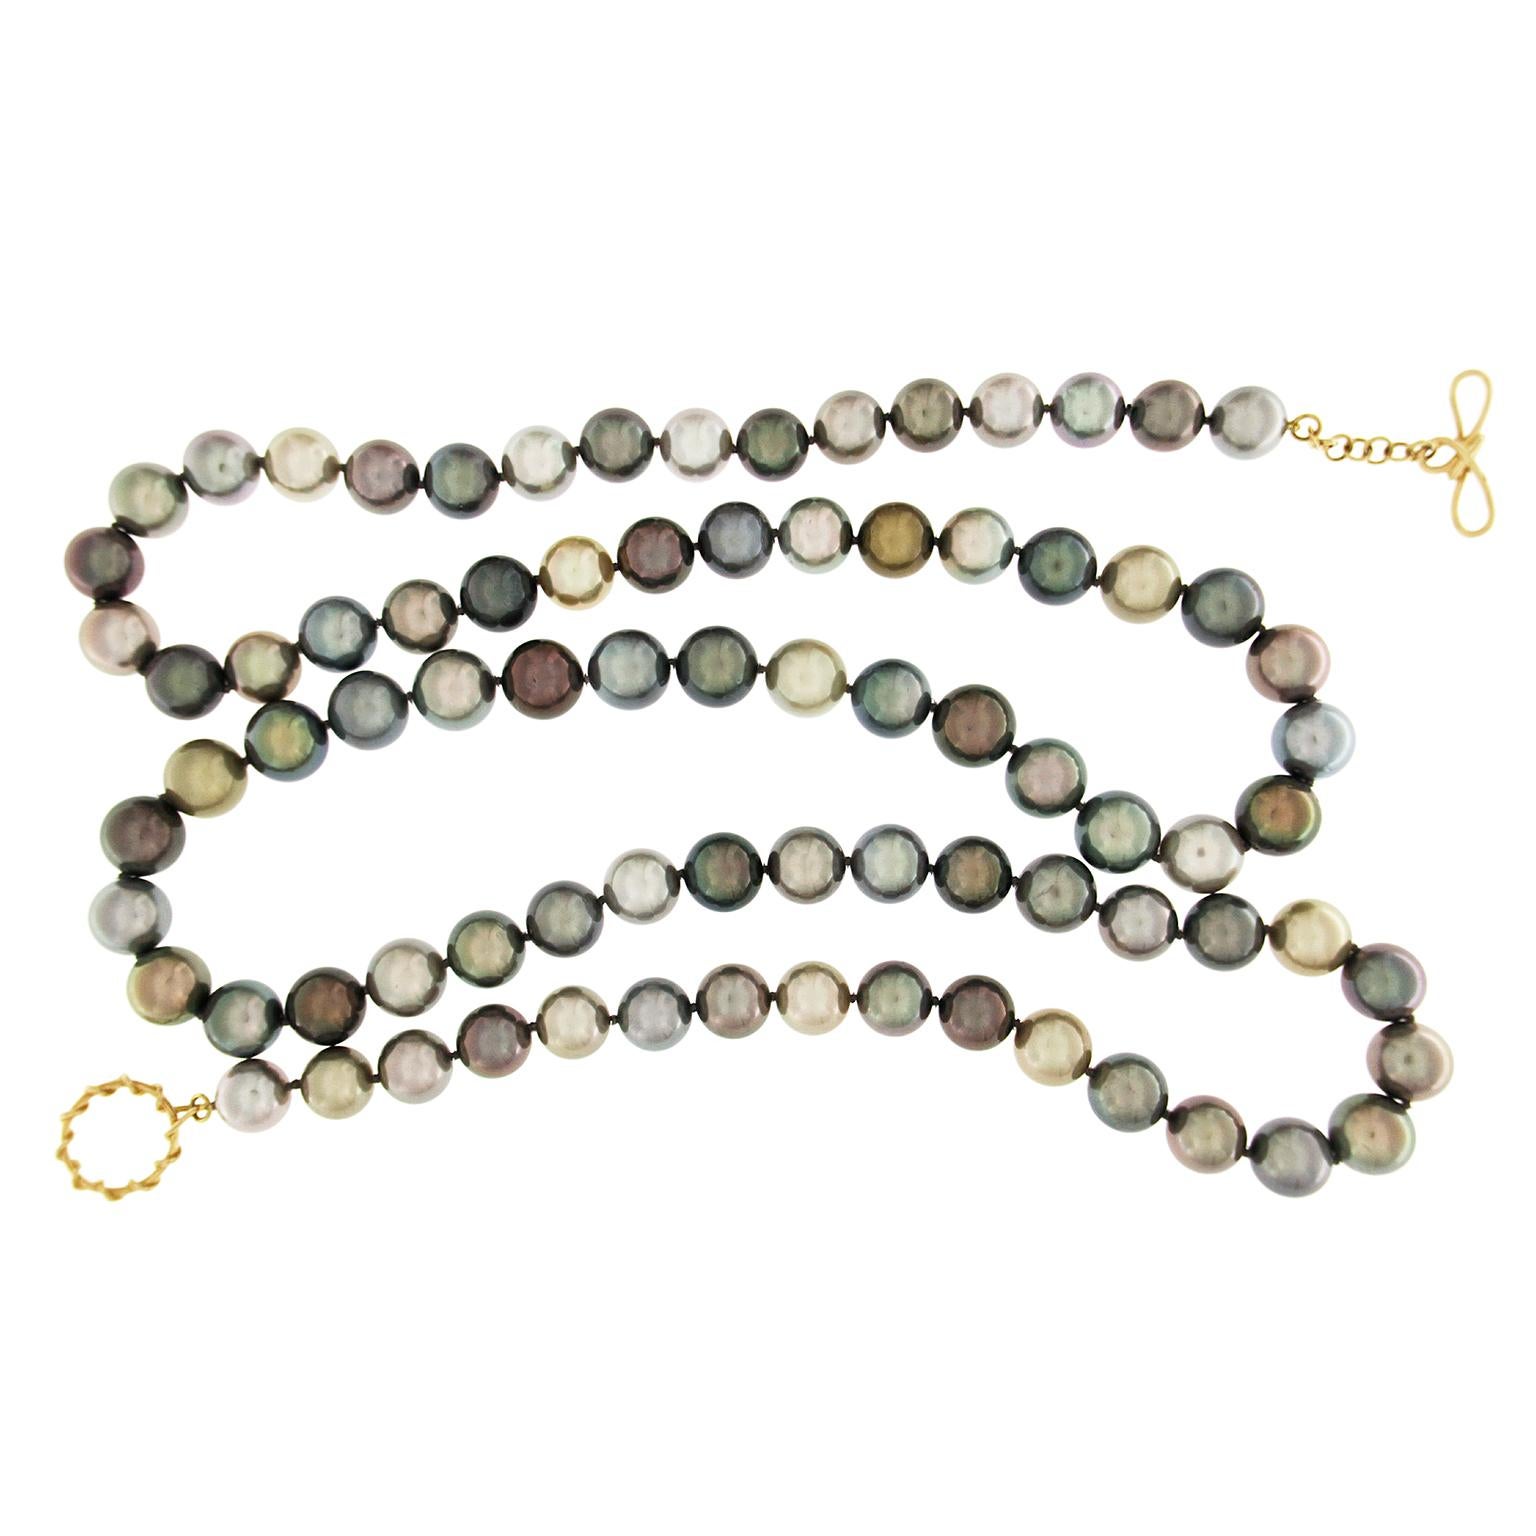 Valentin Magro Multi-Color Tahitian Pearl Necklace showcases a range of color. This necklace showcases Tahitian pearls and their range of color. Deep greys, metallic blues and more fill the strand. As the pearls come closer to the center, they grow